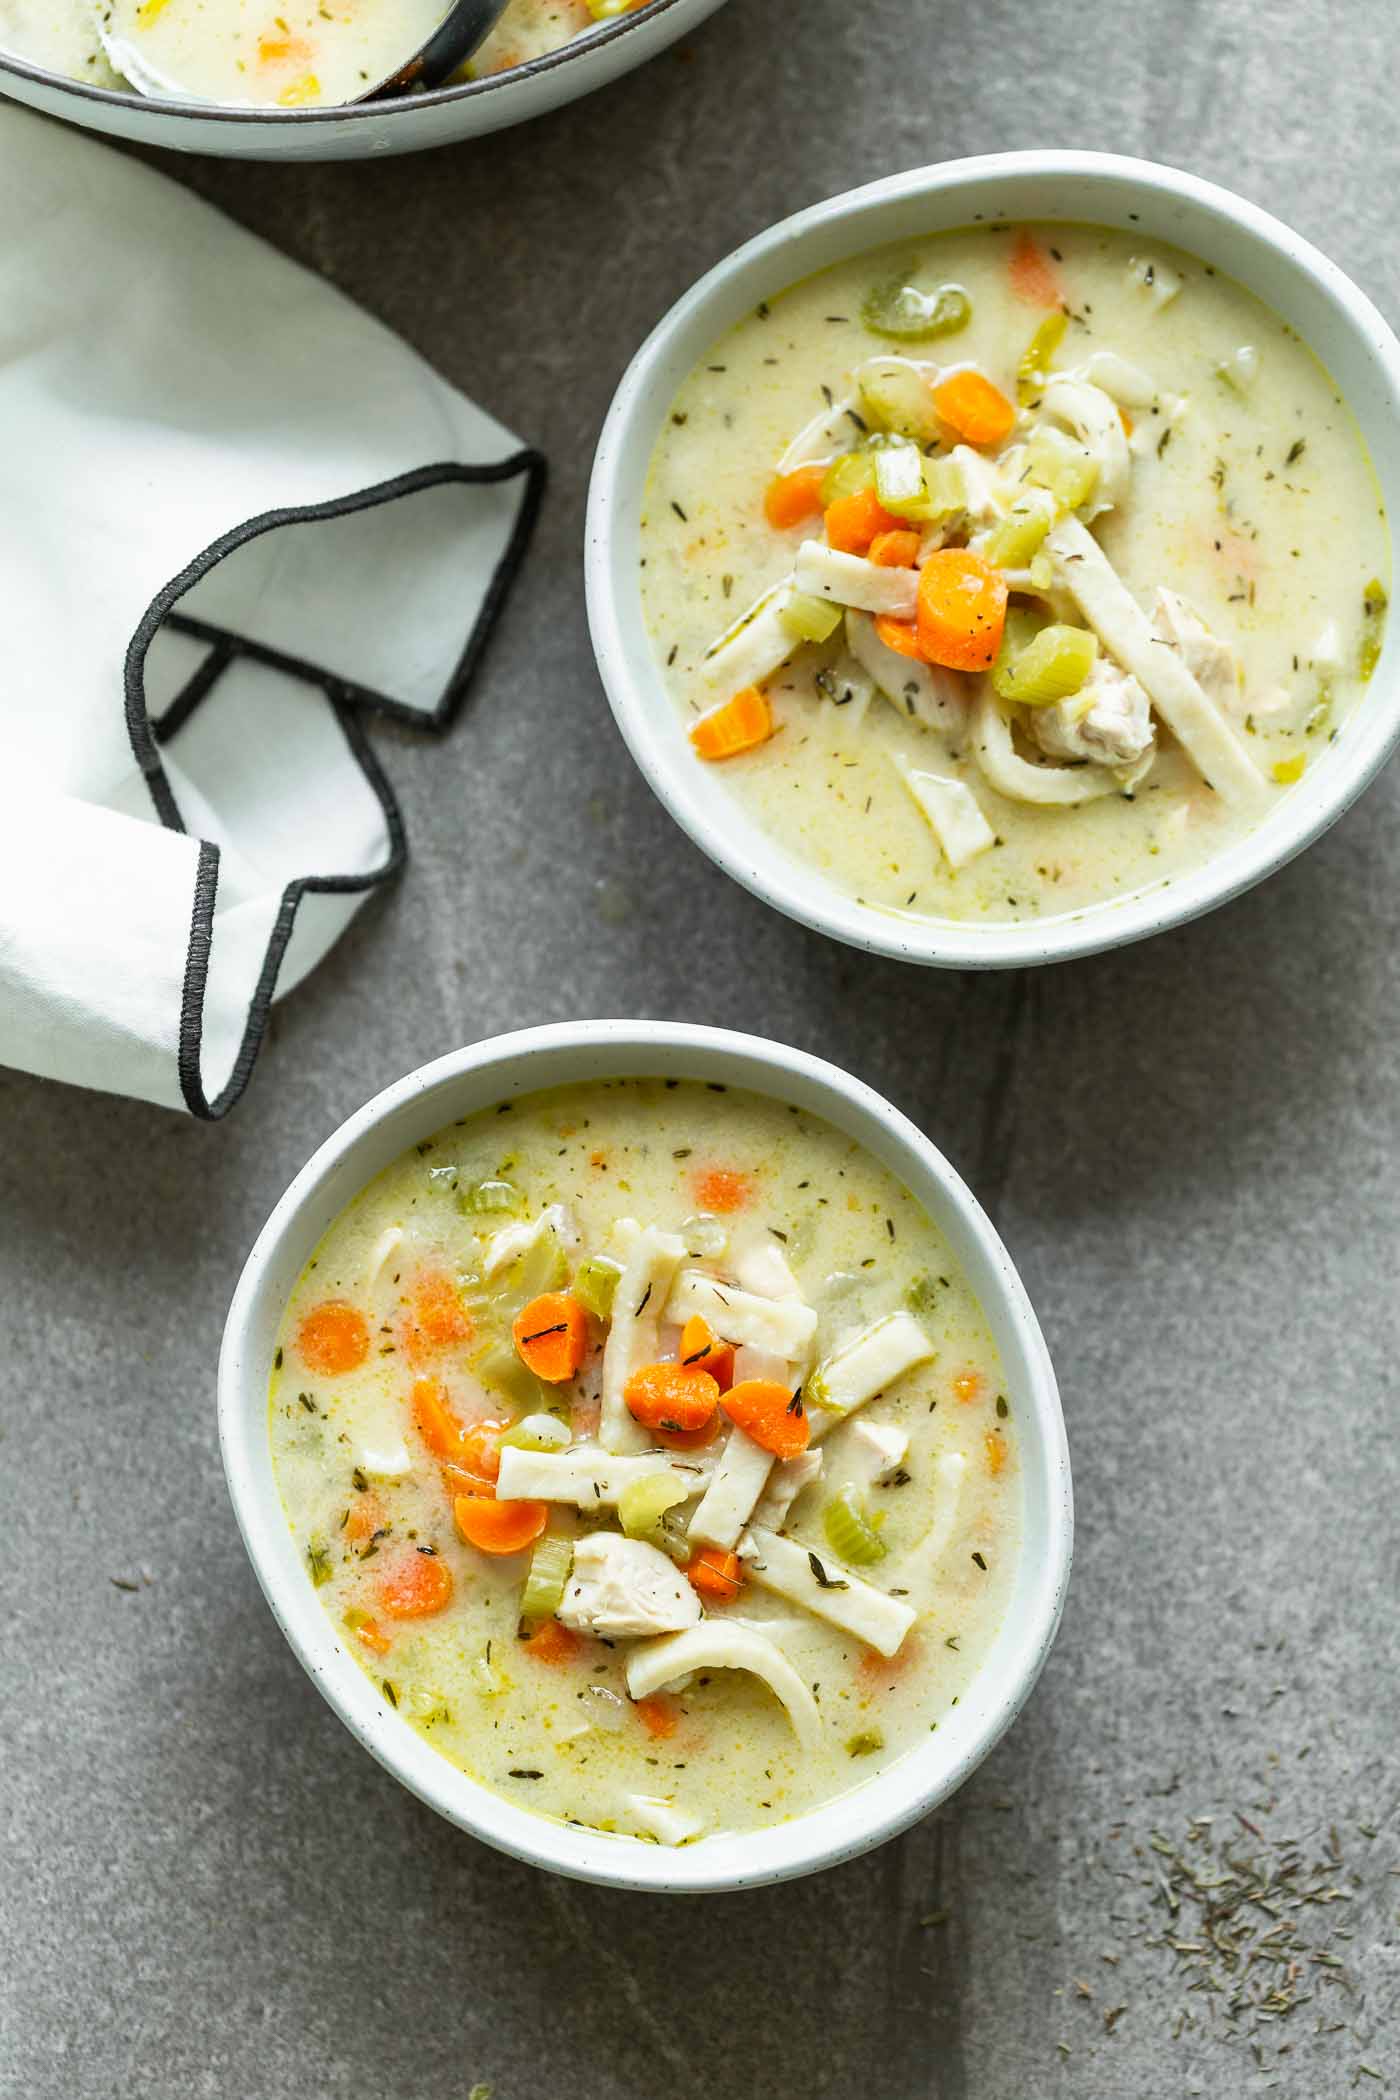 Creamy chicken noodle soup with egg noodles, carrots, celery, and chicken